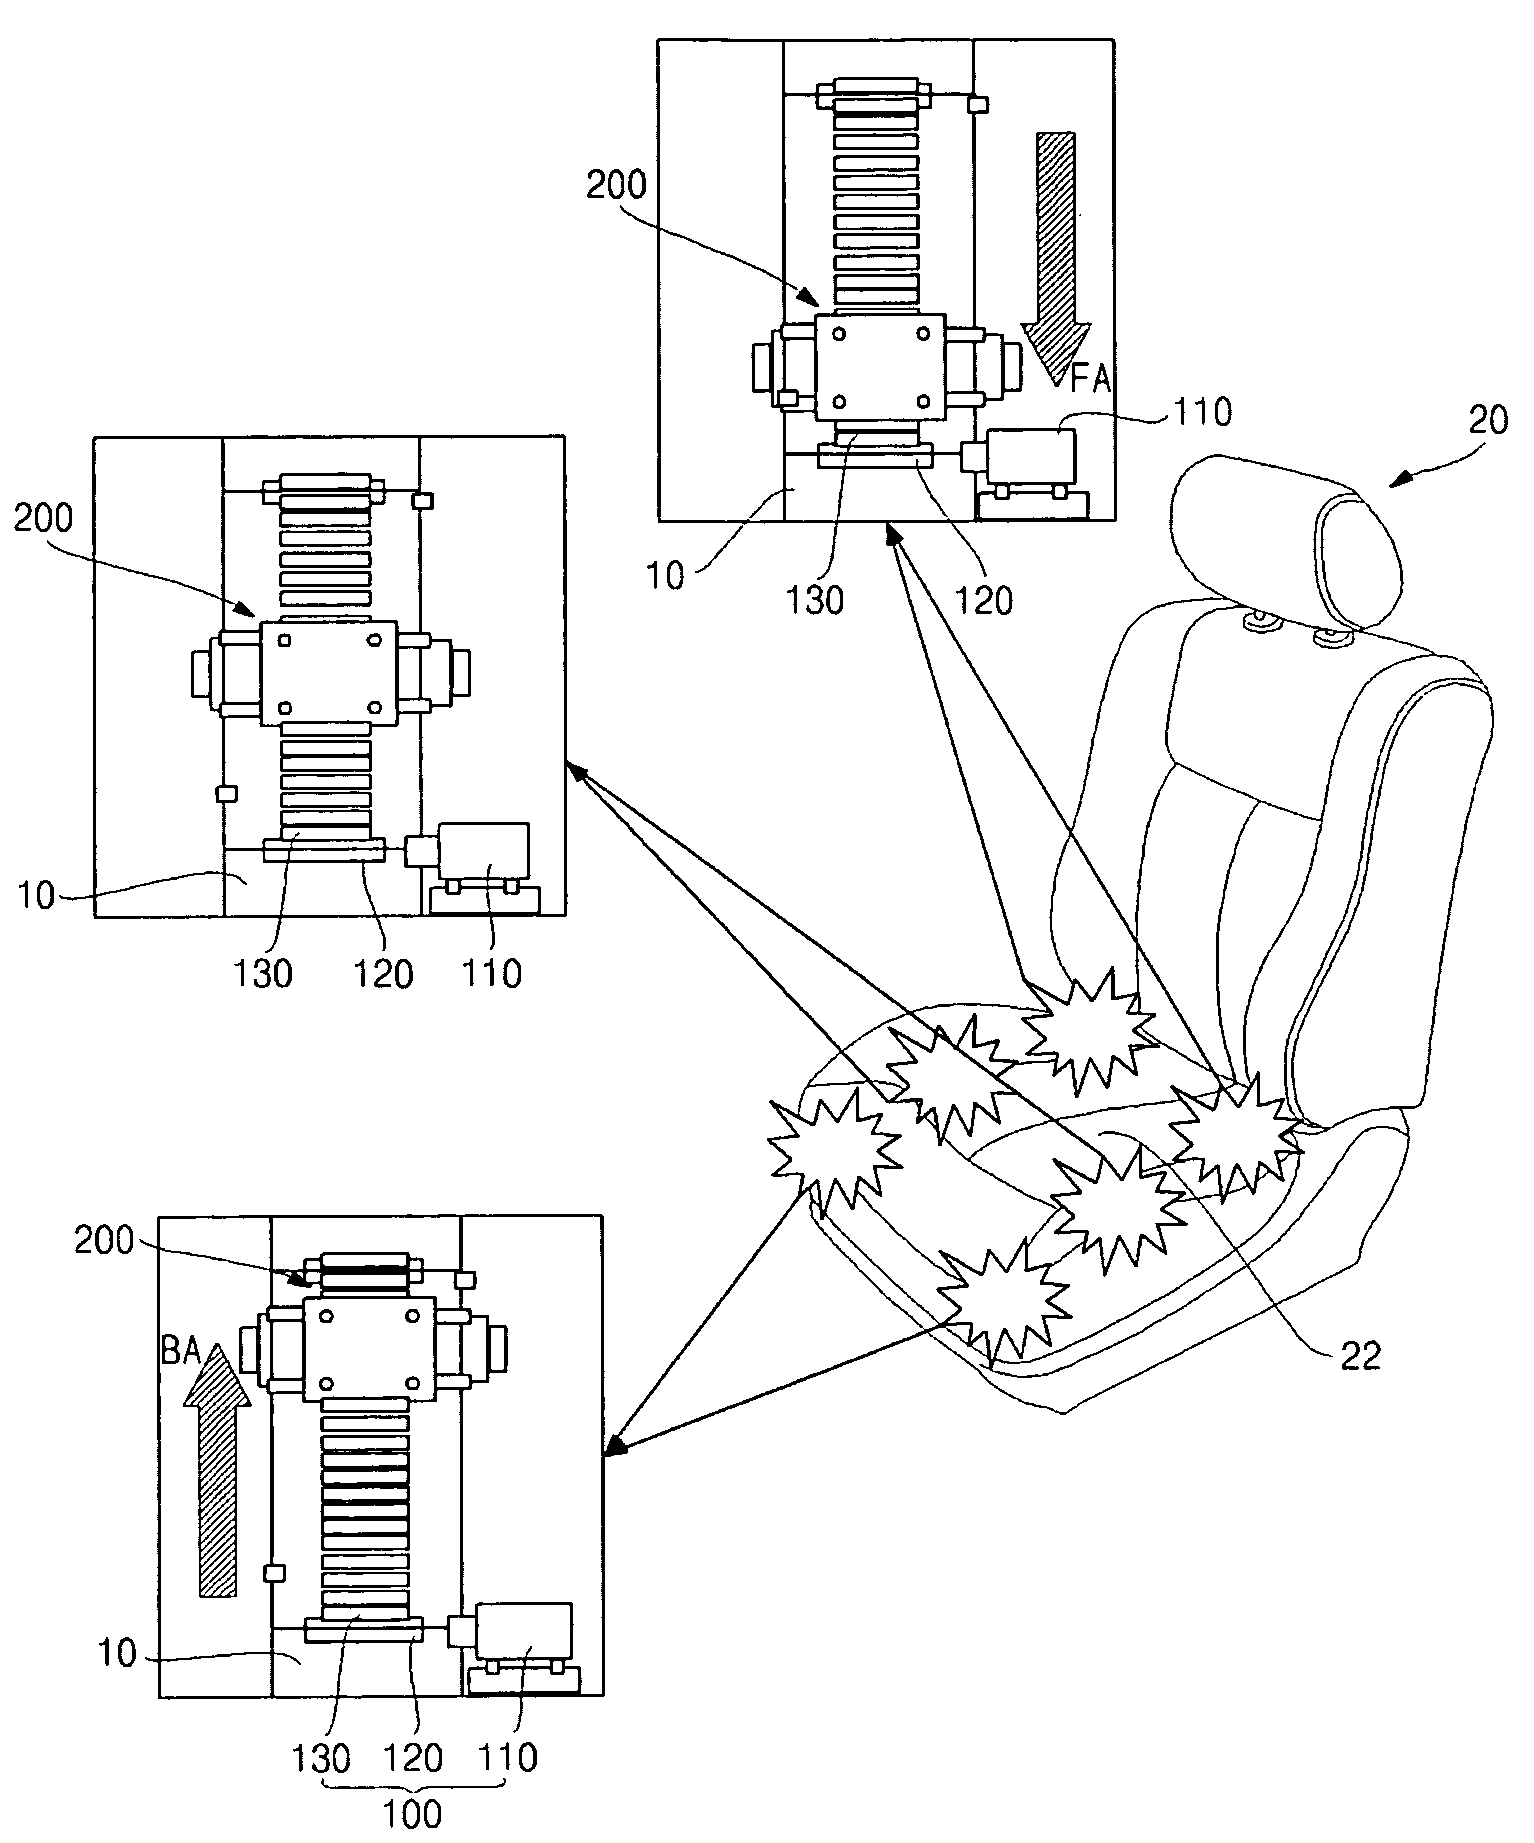 Vehicle direction guide vibration system and method